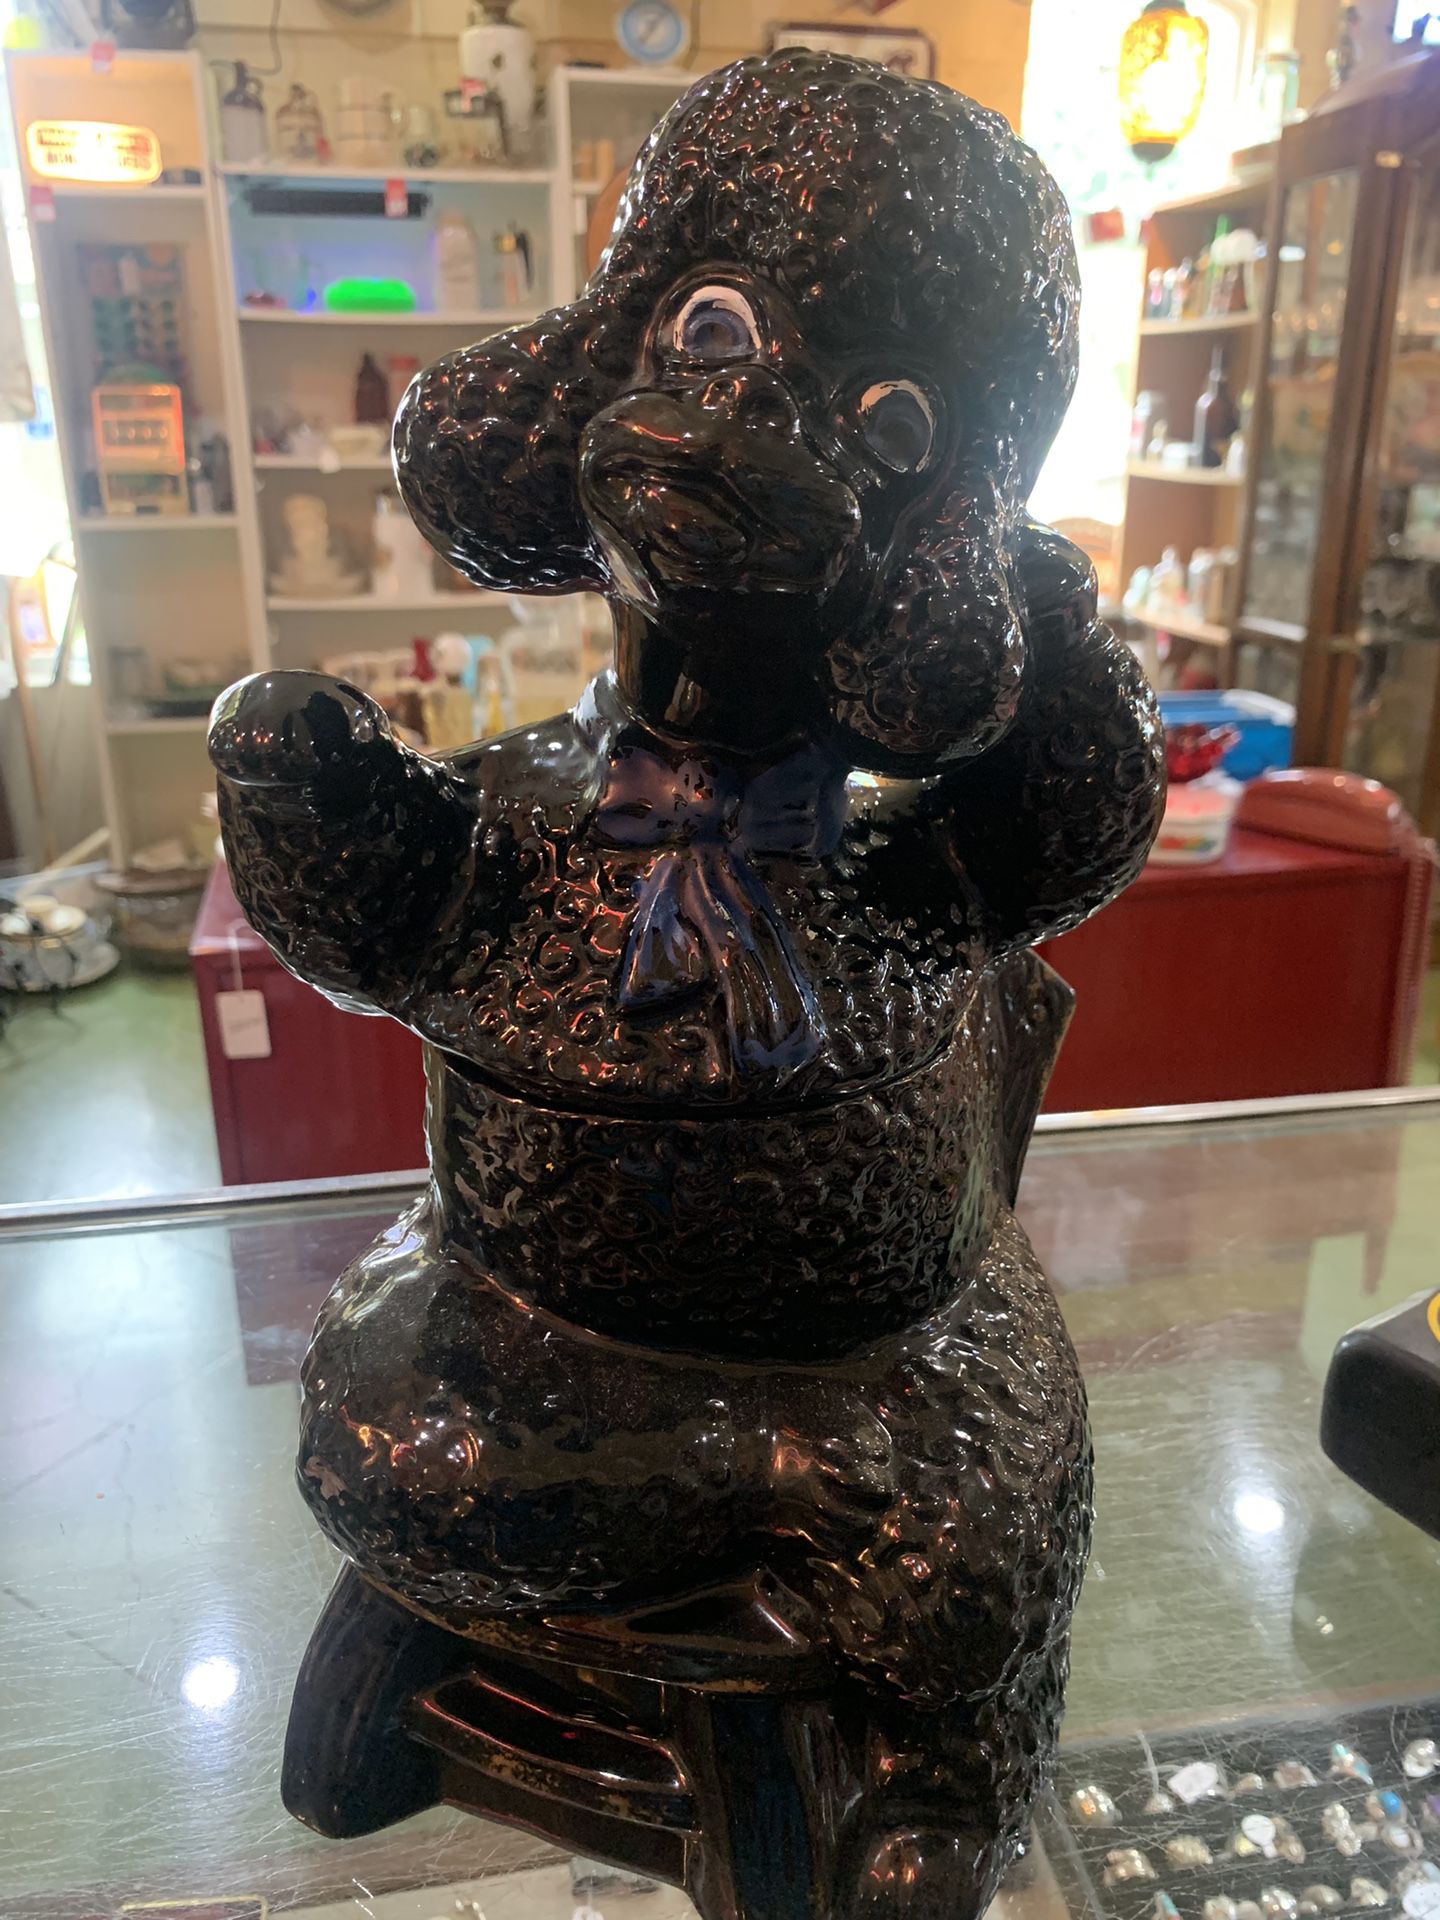 7x14 vintage black poodle canister cookie jar. 35.00.  Johanna at Antiques and More. Located at 316b Main Street Buda. Antiques vintage retro furnitur